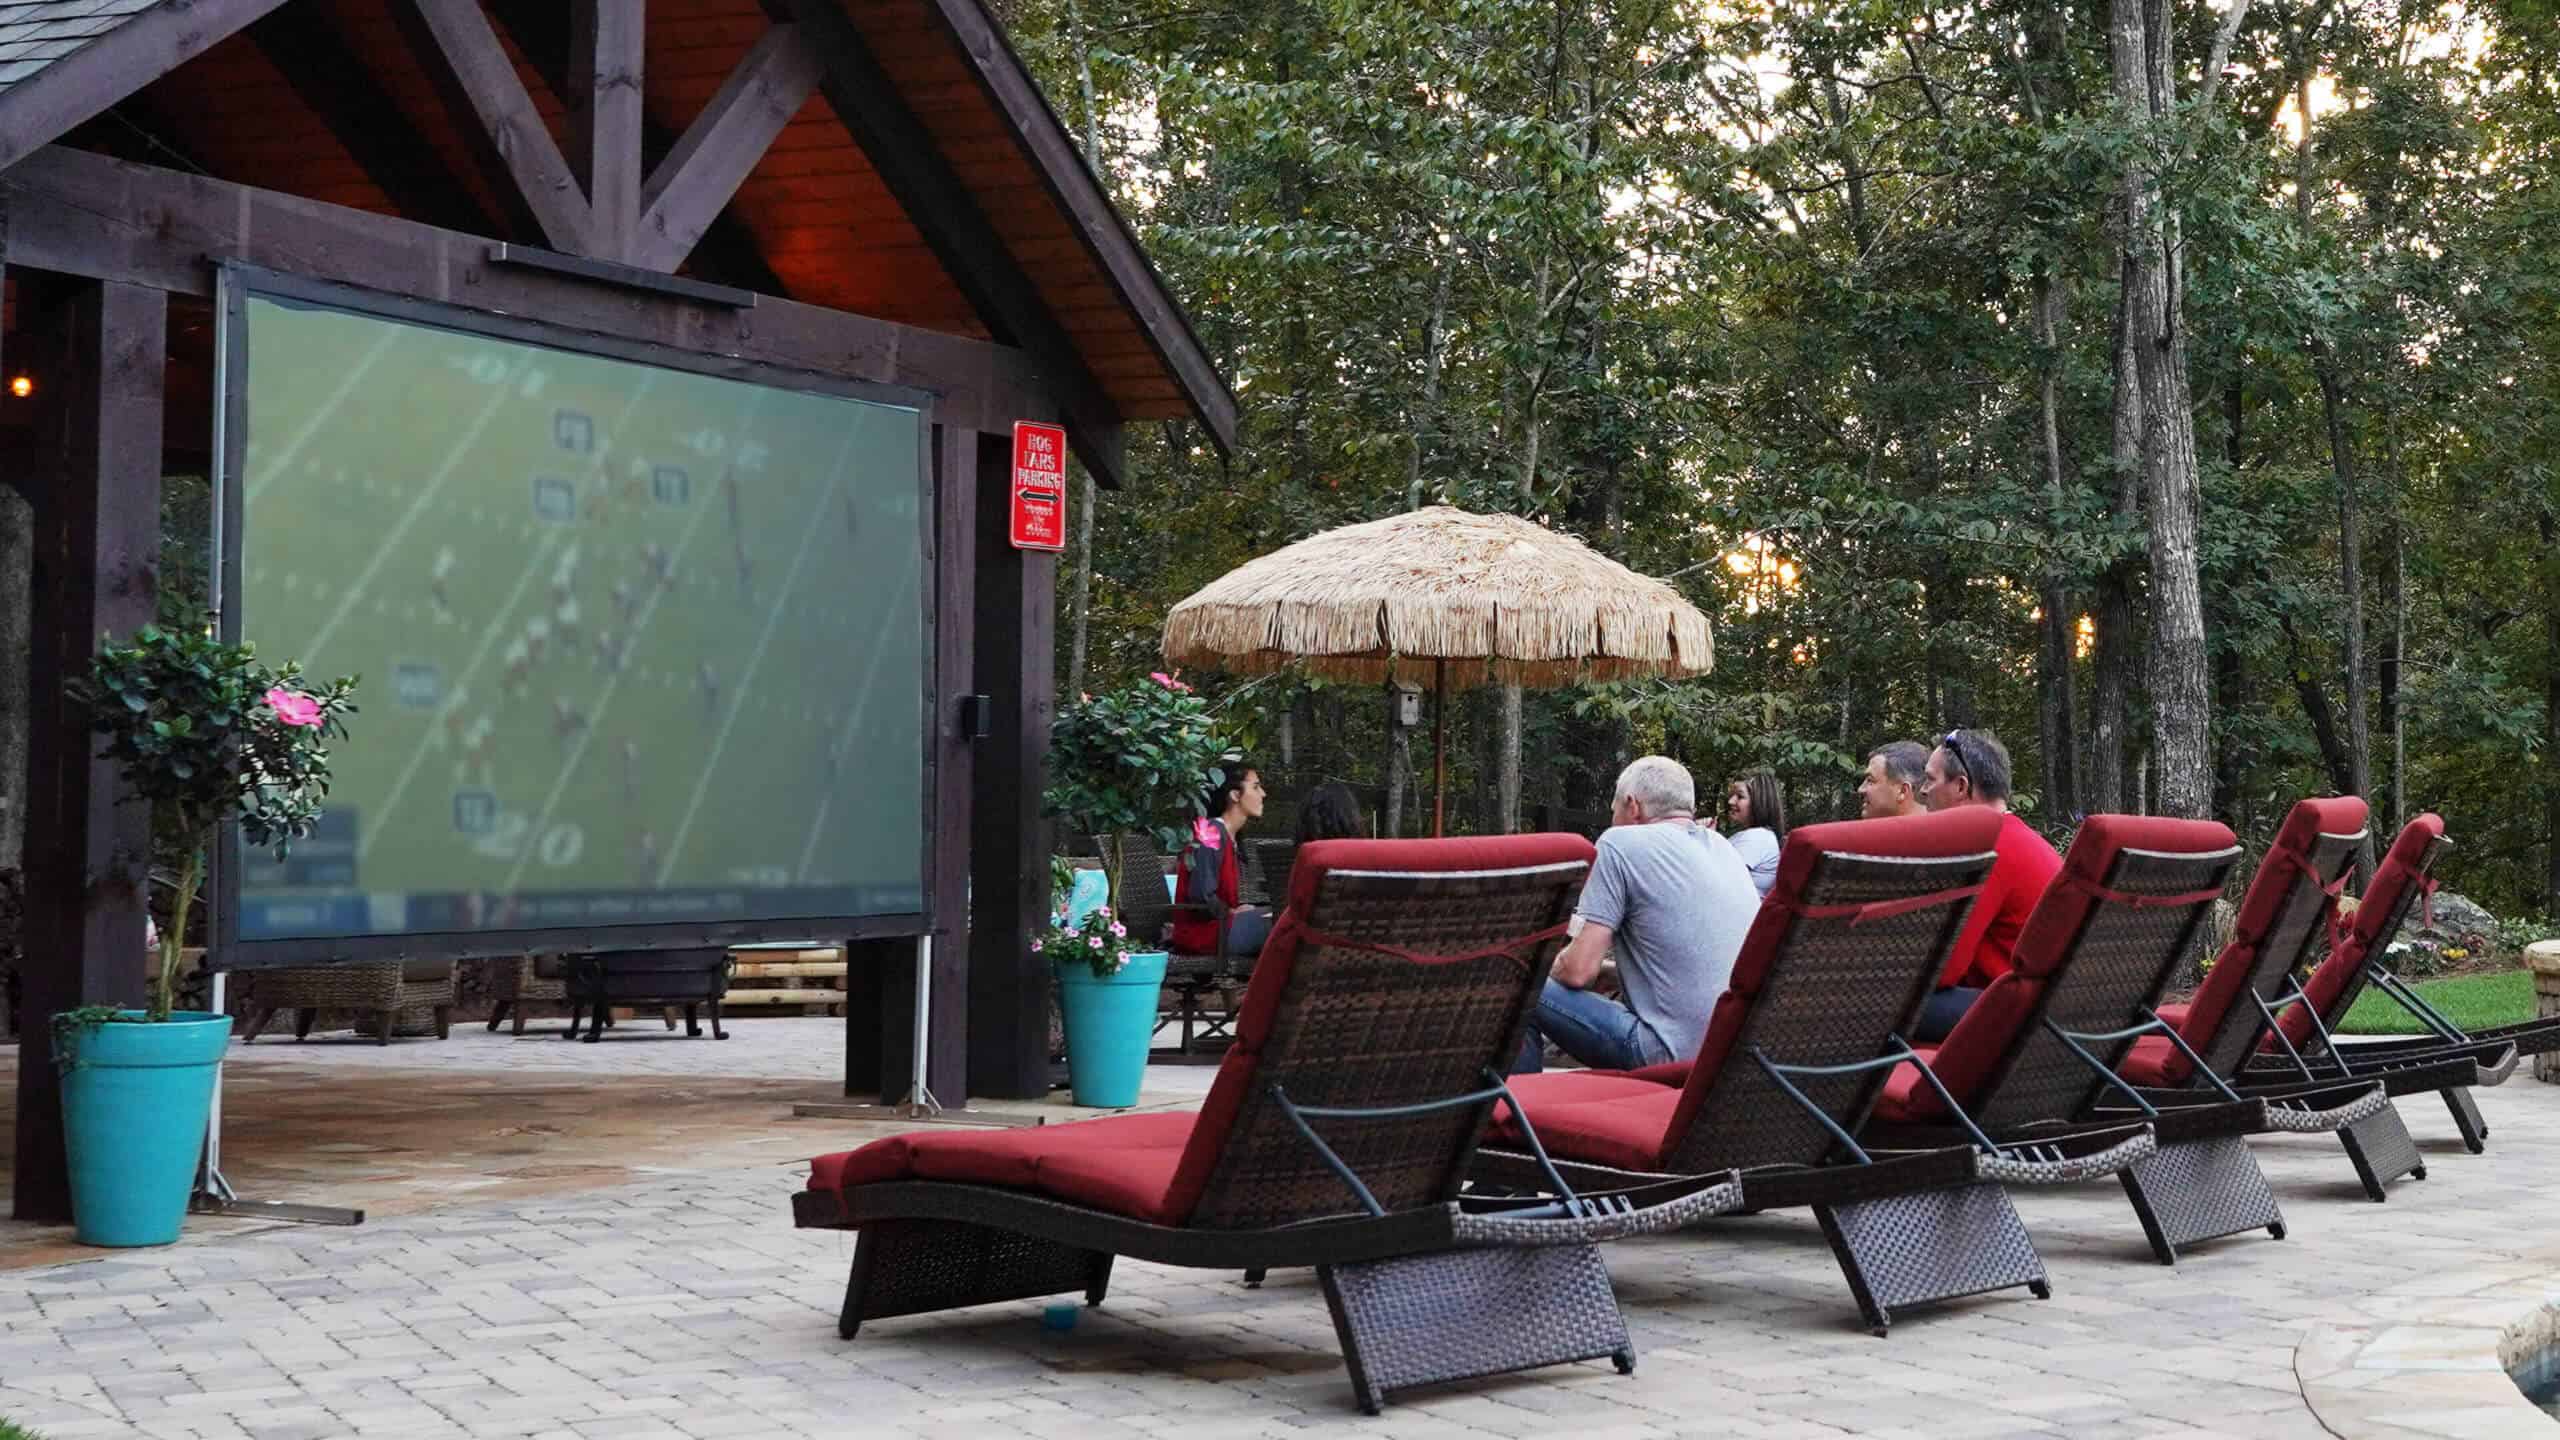 Lounge chairs watching football game outside